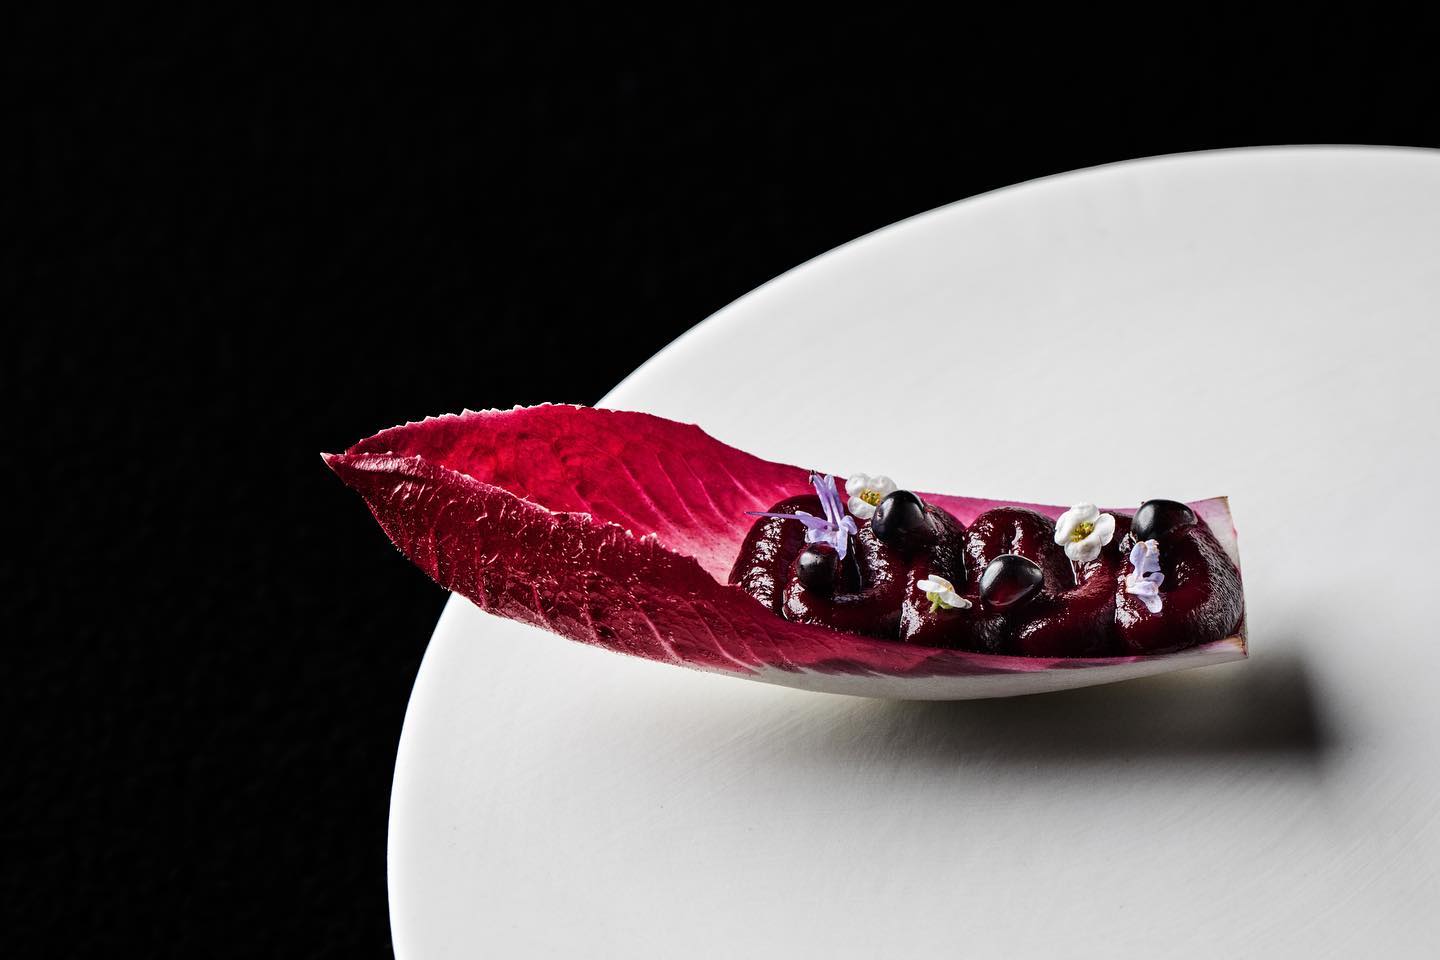 Endive, enhanced with beet and blackberry, at San Diego’s new three-star restaurant, Addison. 